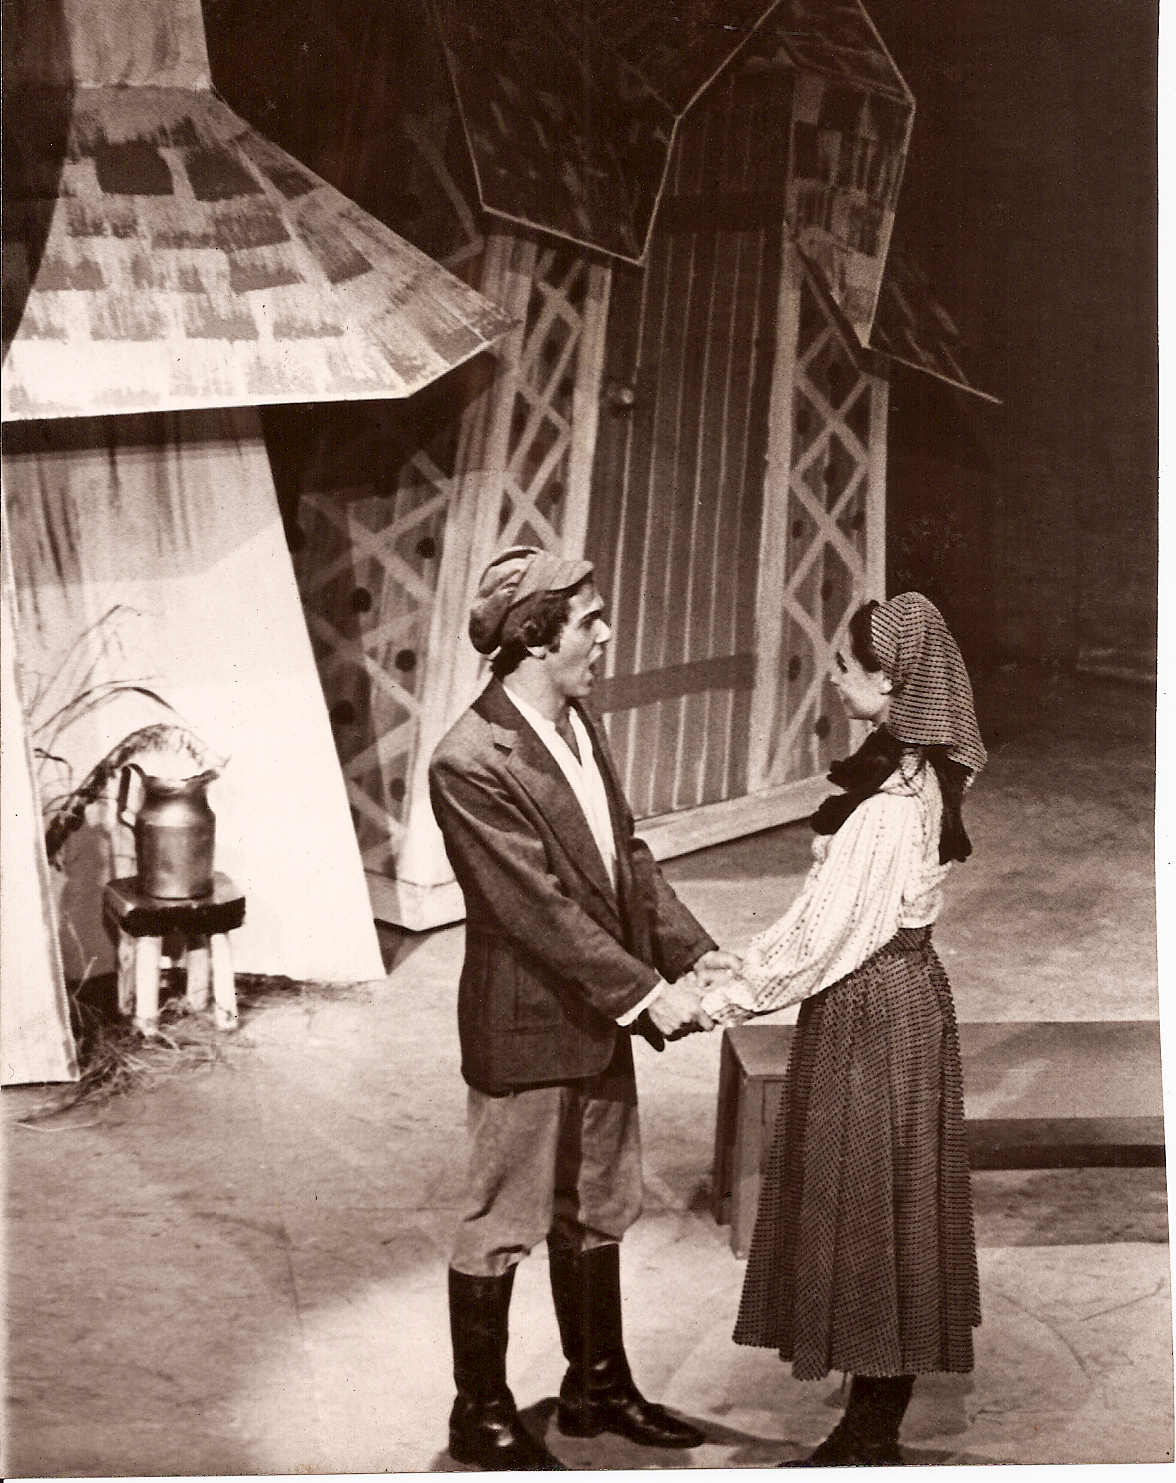 The Kosacks were everywhere. Perchik in FIDDLER ON THE ROOF with Kyra Hebert